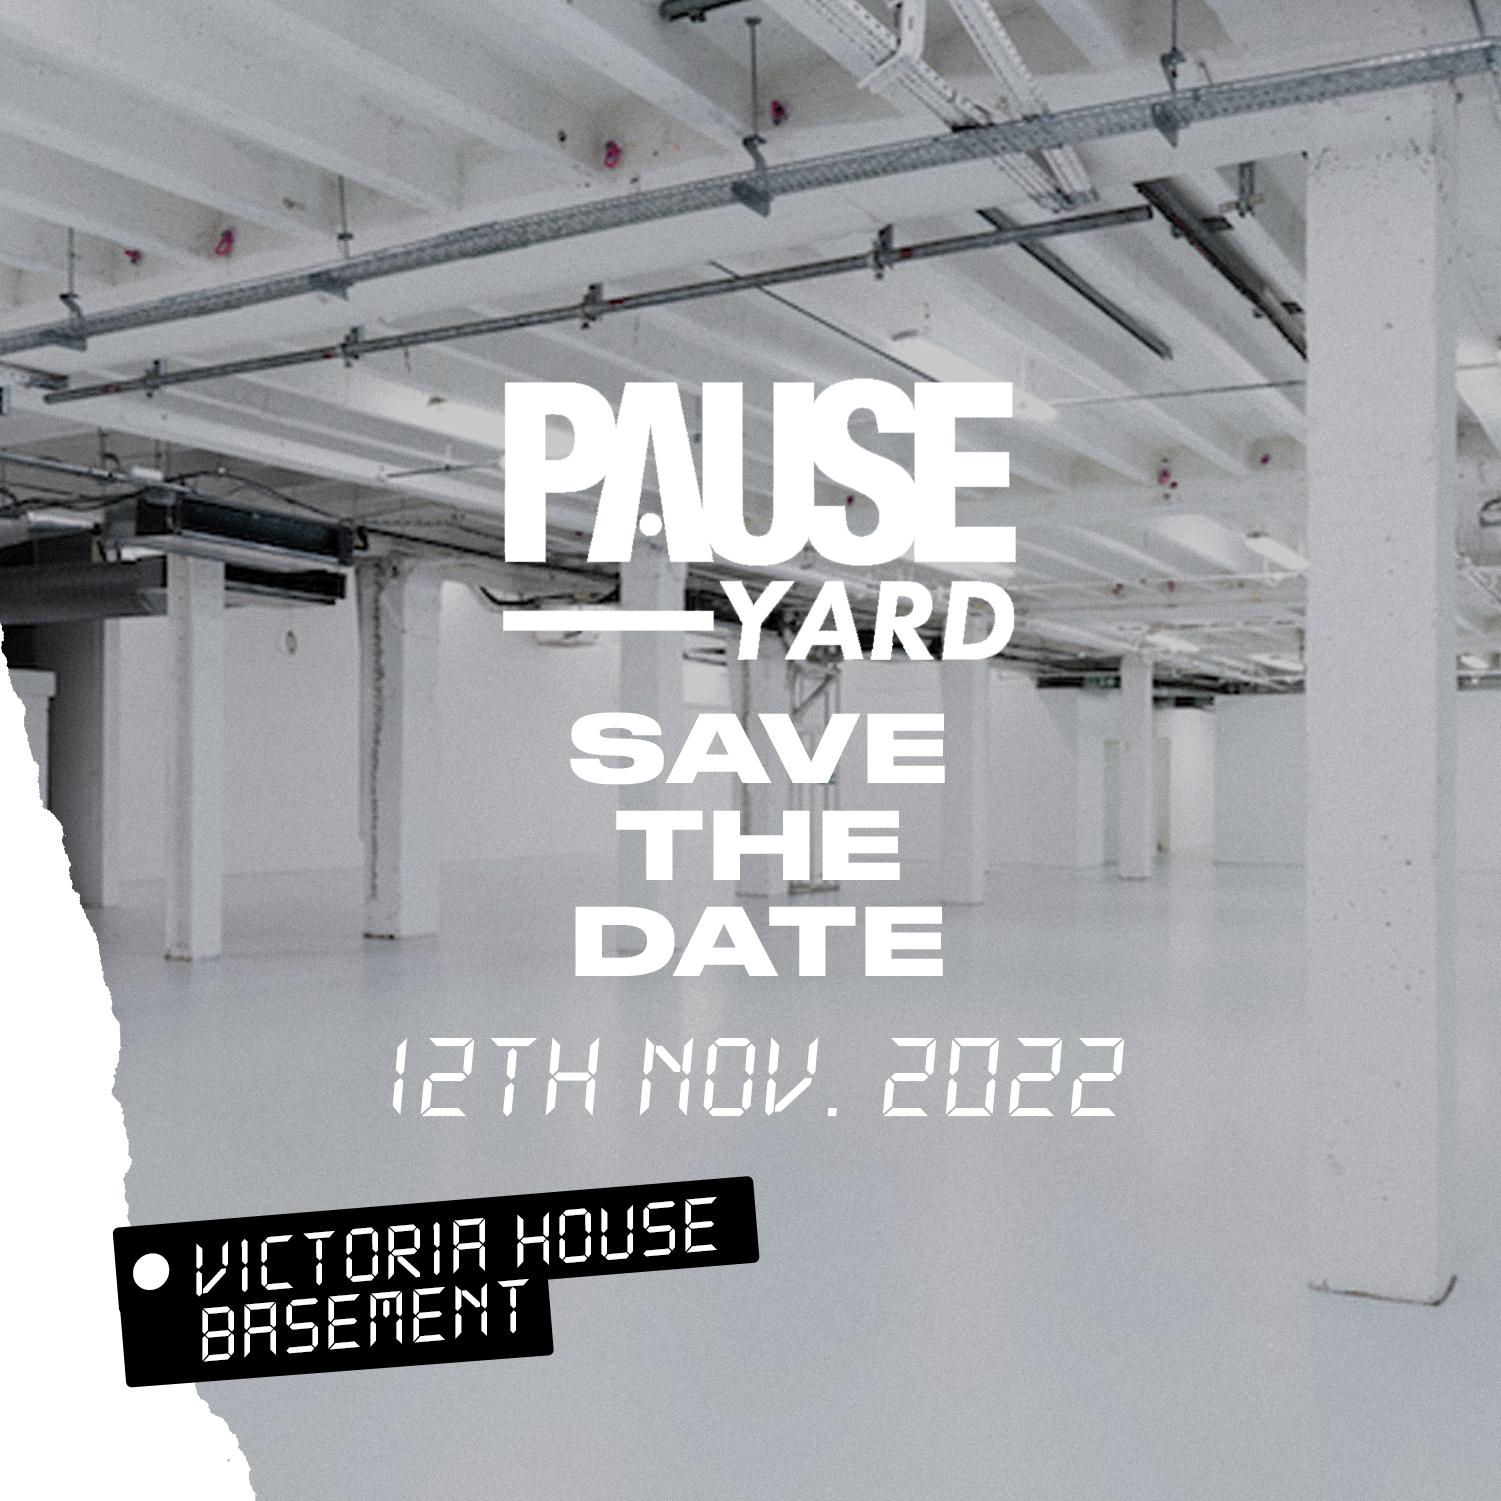 PAUSE Yard 2022 Is Returning Back This Year